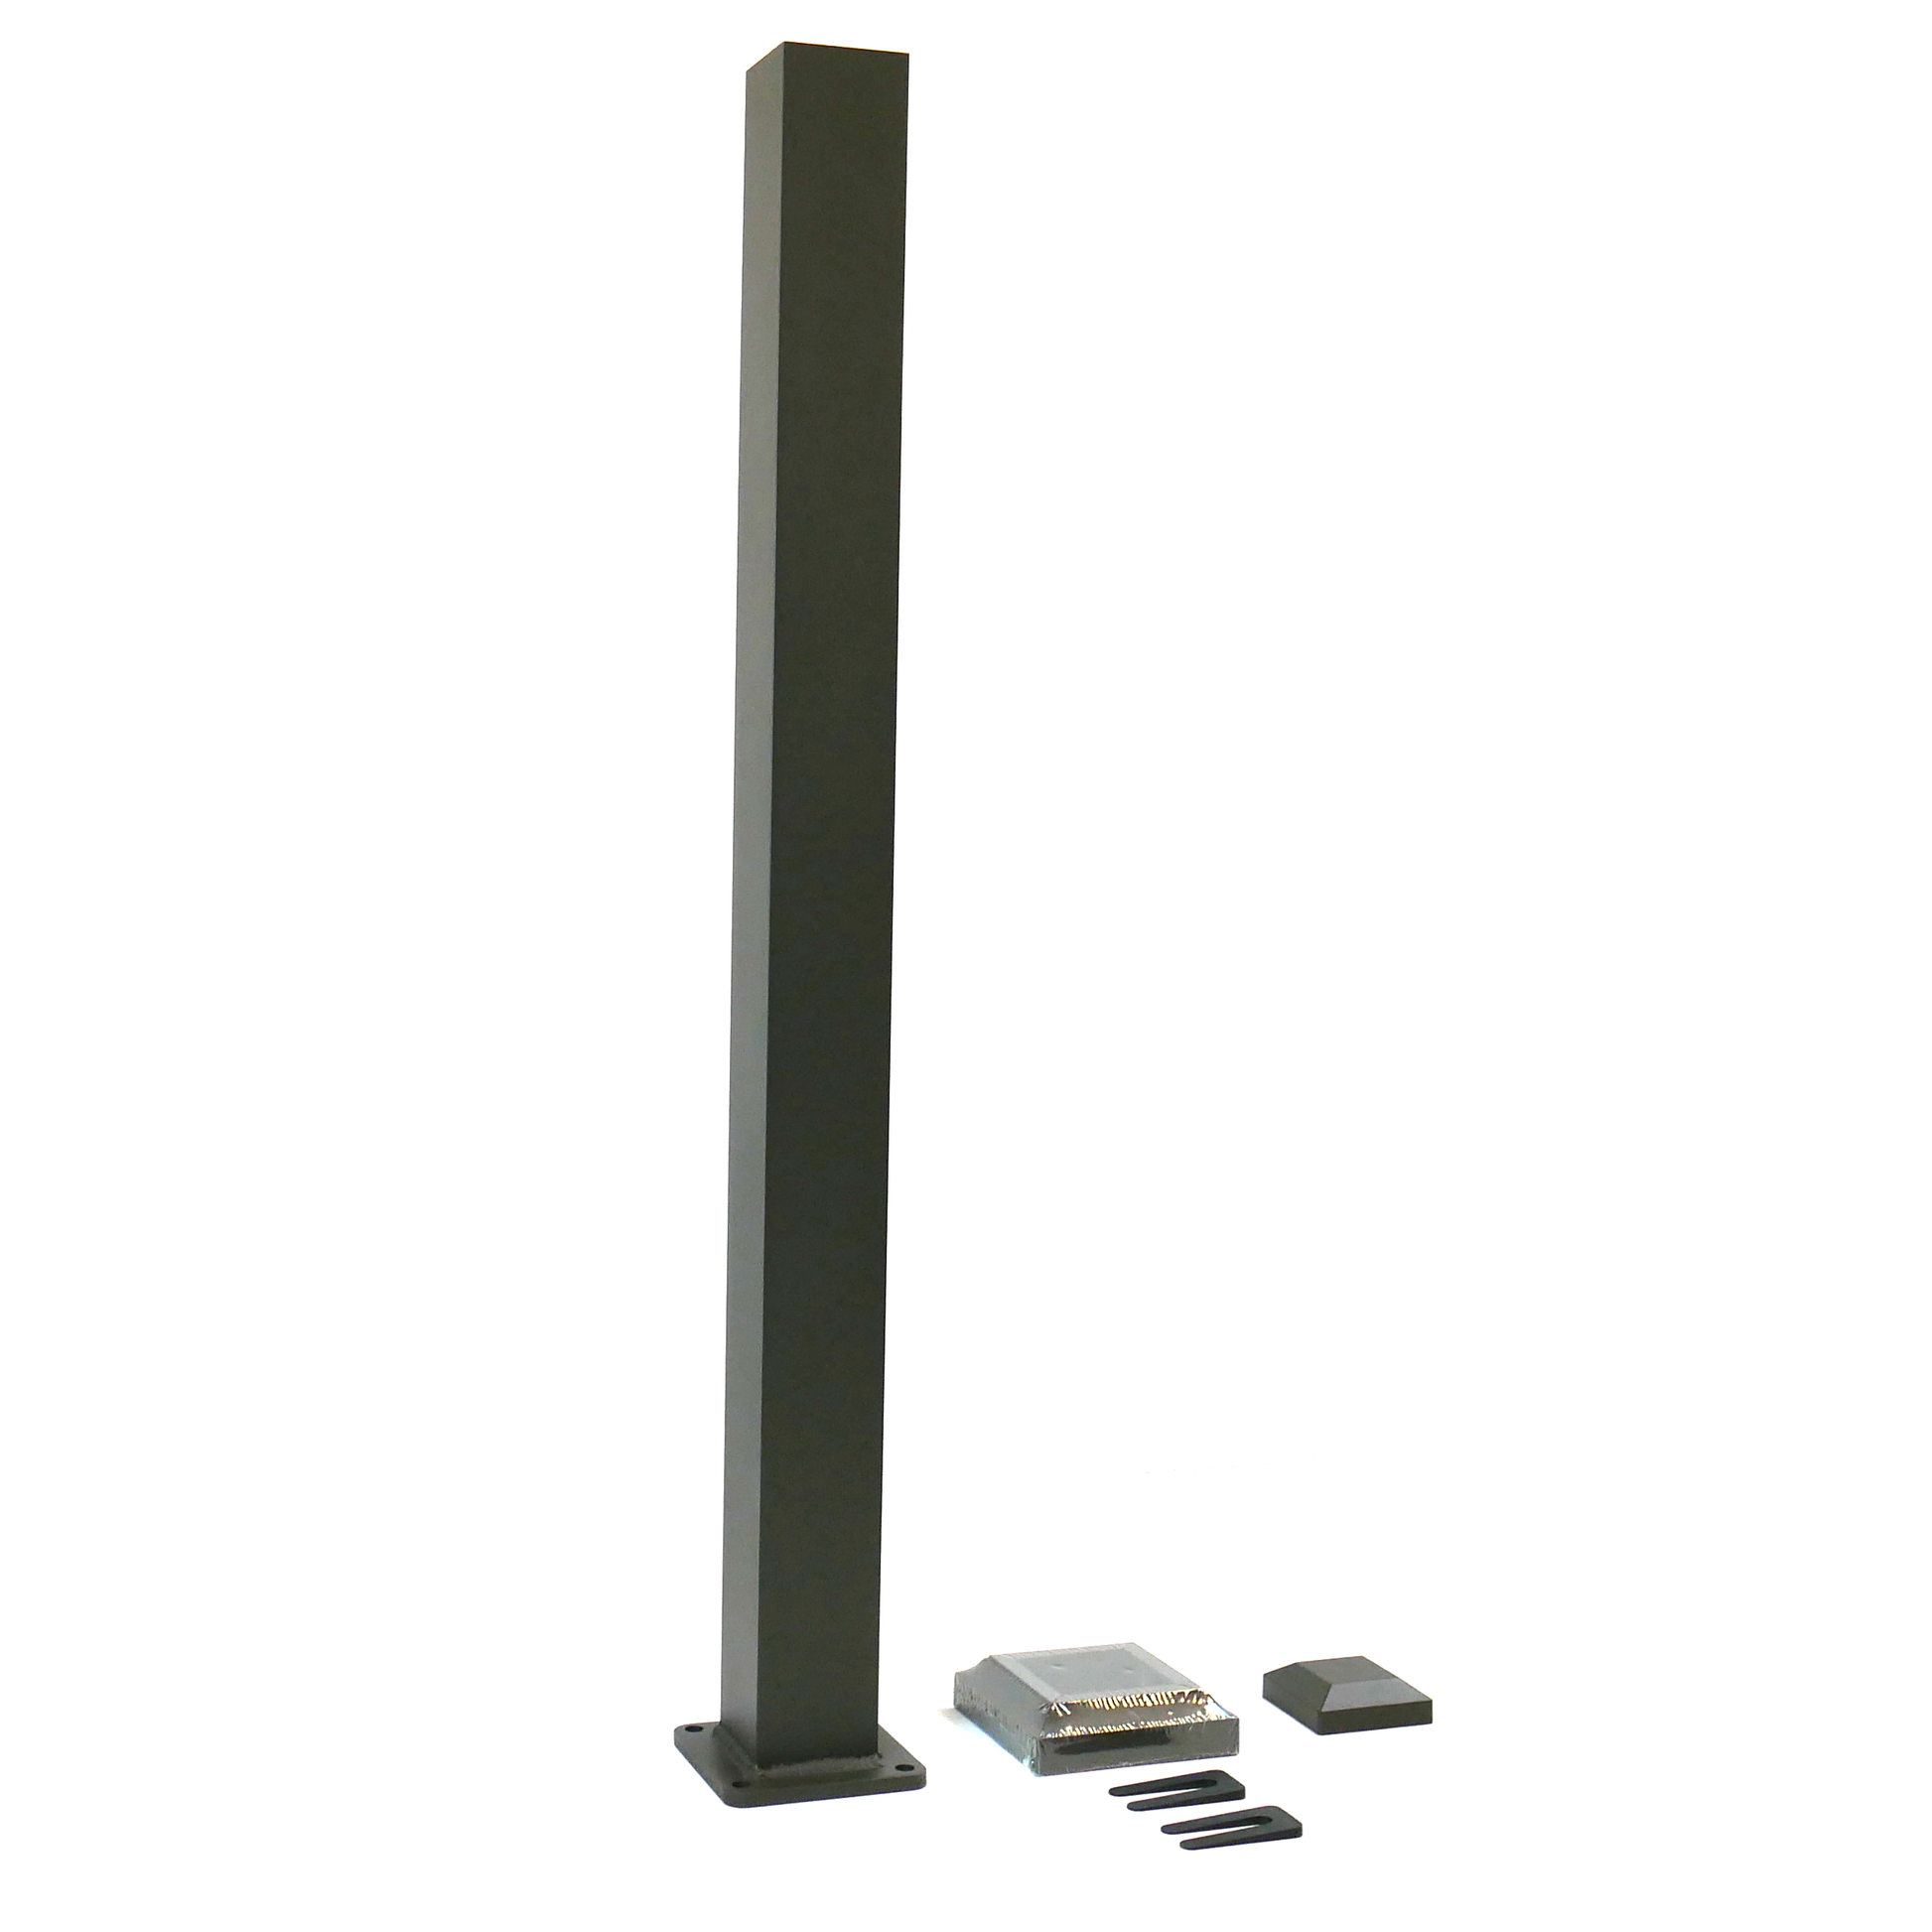 Product photo of Dekpro Textured Bronze 3" x 3" x 40" aluminum handrail post kit. Three inches by Forty Inches